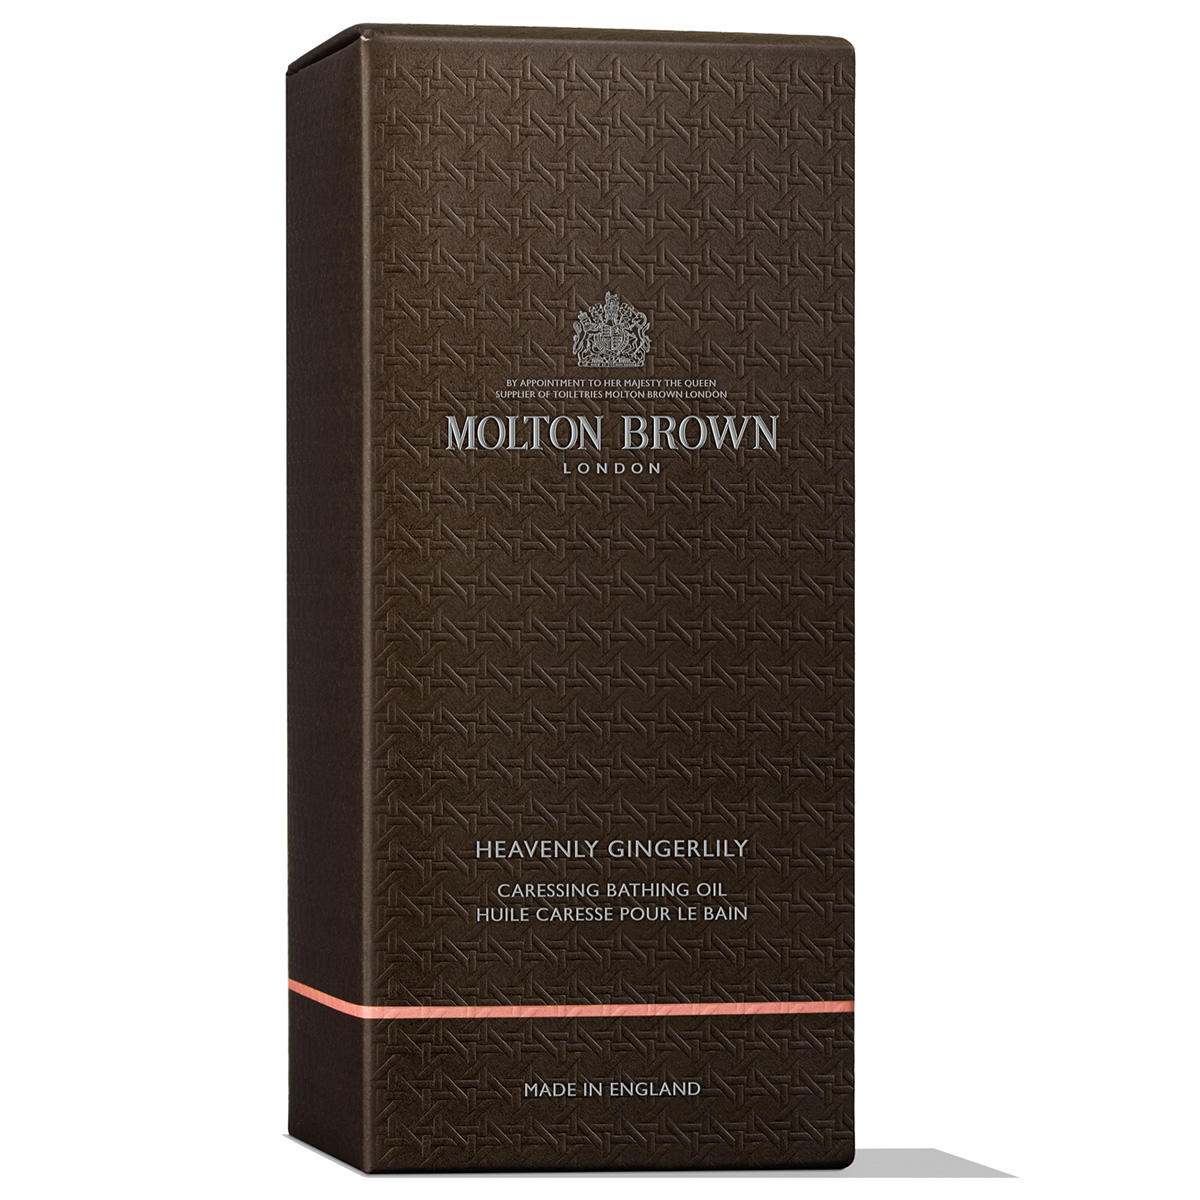 MOLTON BROWN Heavenly Gingerlily Caressing Bathing Oil 200 ml - 3